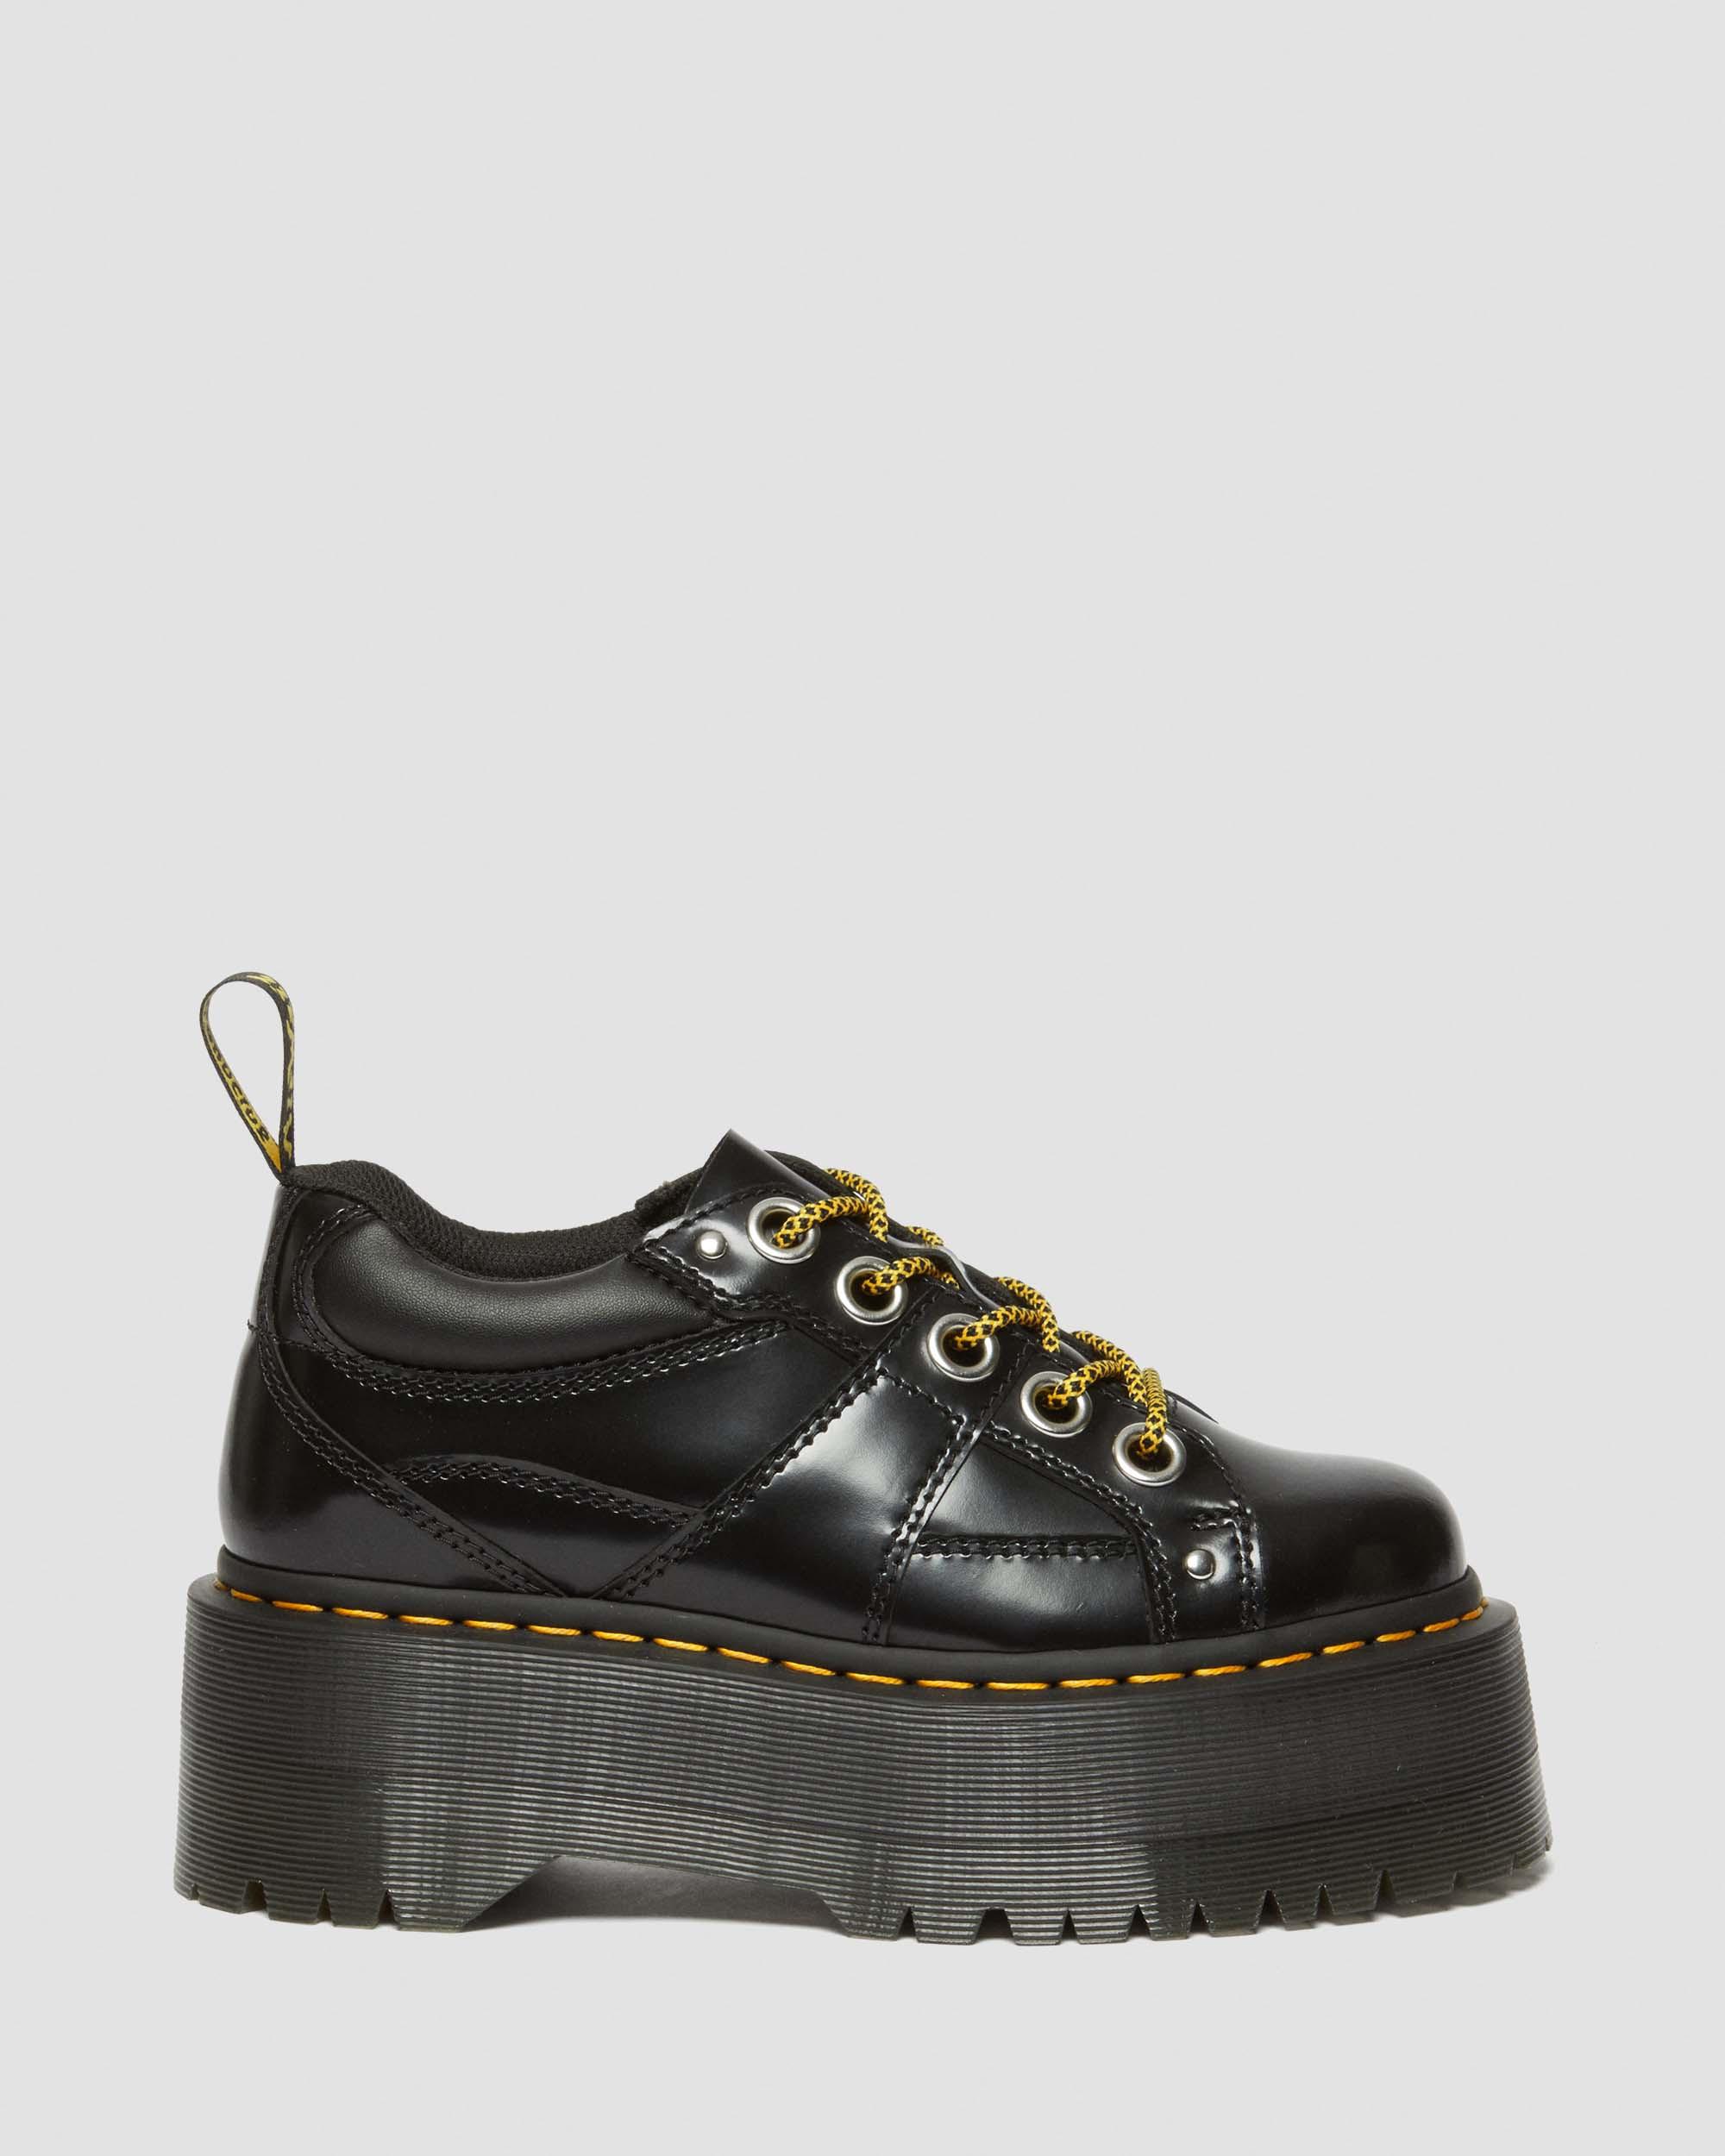 5-Eye Max Buttero Leather Platform Shoes in Black